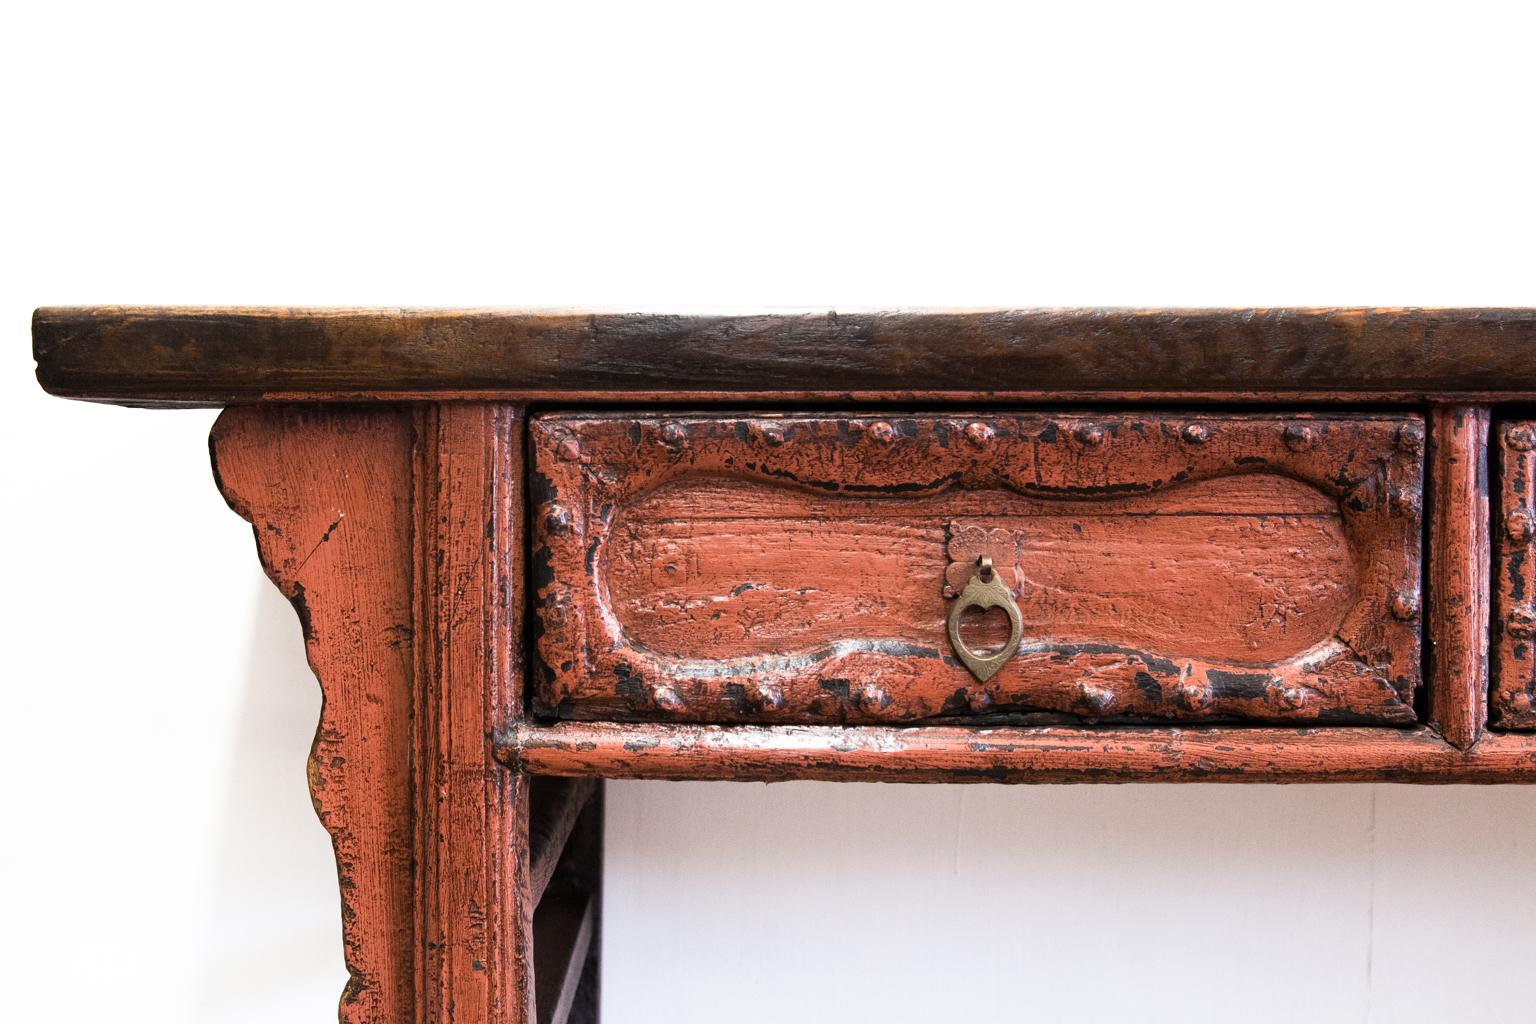 Asian painted console table with three drawers; the top has a waxed finish. There are carved moldings on the drawers and bordering applied to the edges of the drawers with engraved brass drop pulls. The legs are shaped, and there are double cross